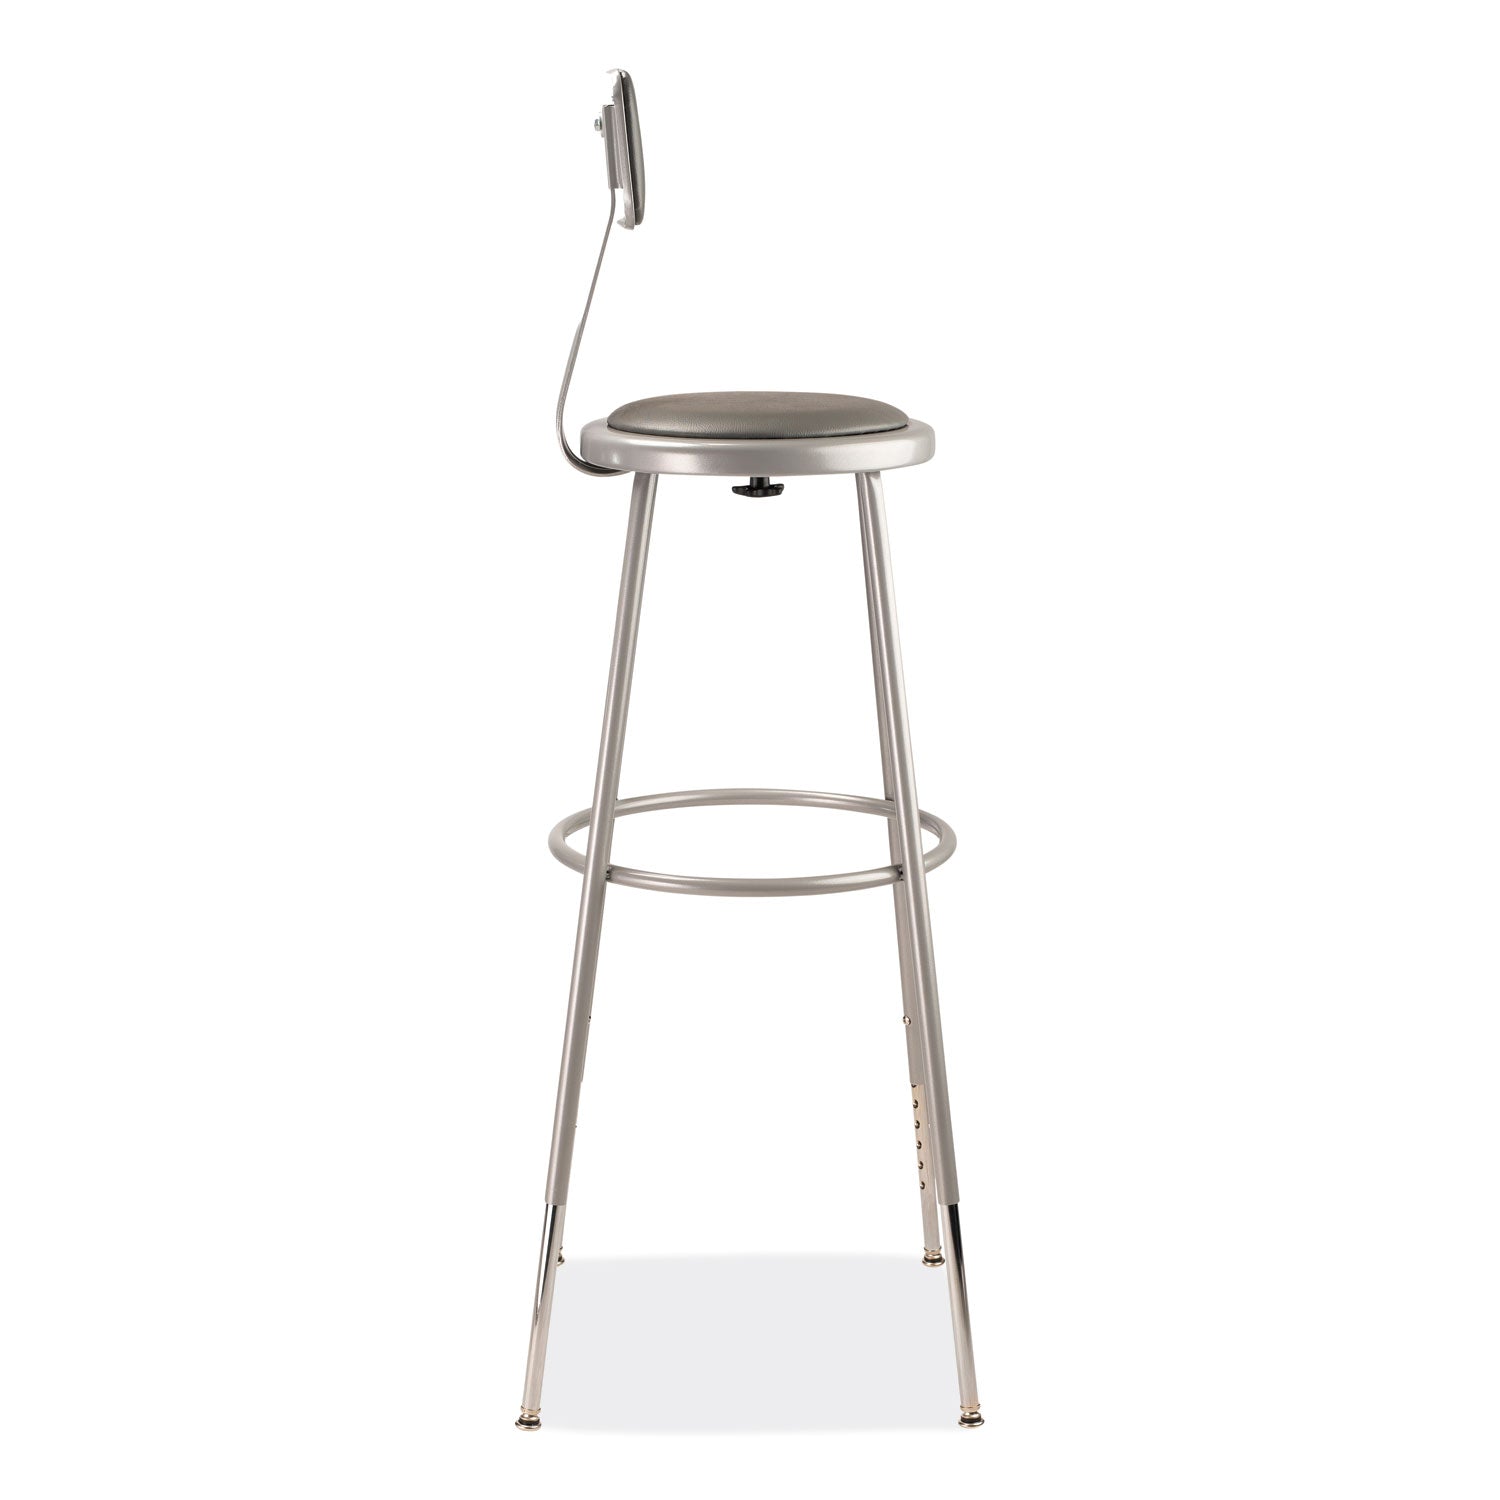 6400-series-height-adjustable-heavy-duty-padded-stool-w-backrest-supports-300lb-32-39-seat-ht-grayships-in-1-3-bus-days_nps6430hb - 2